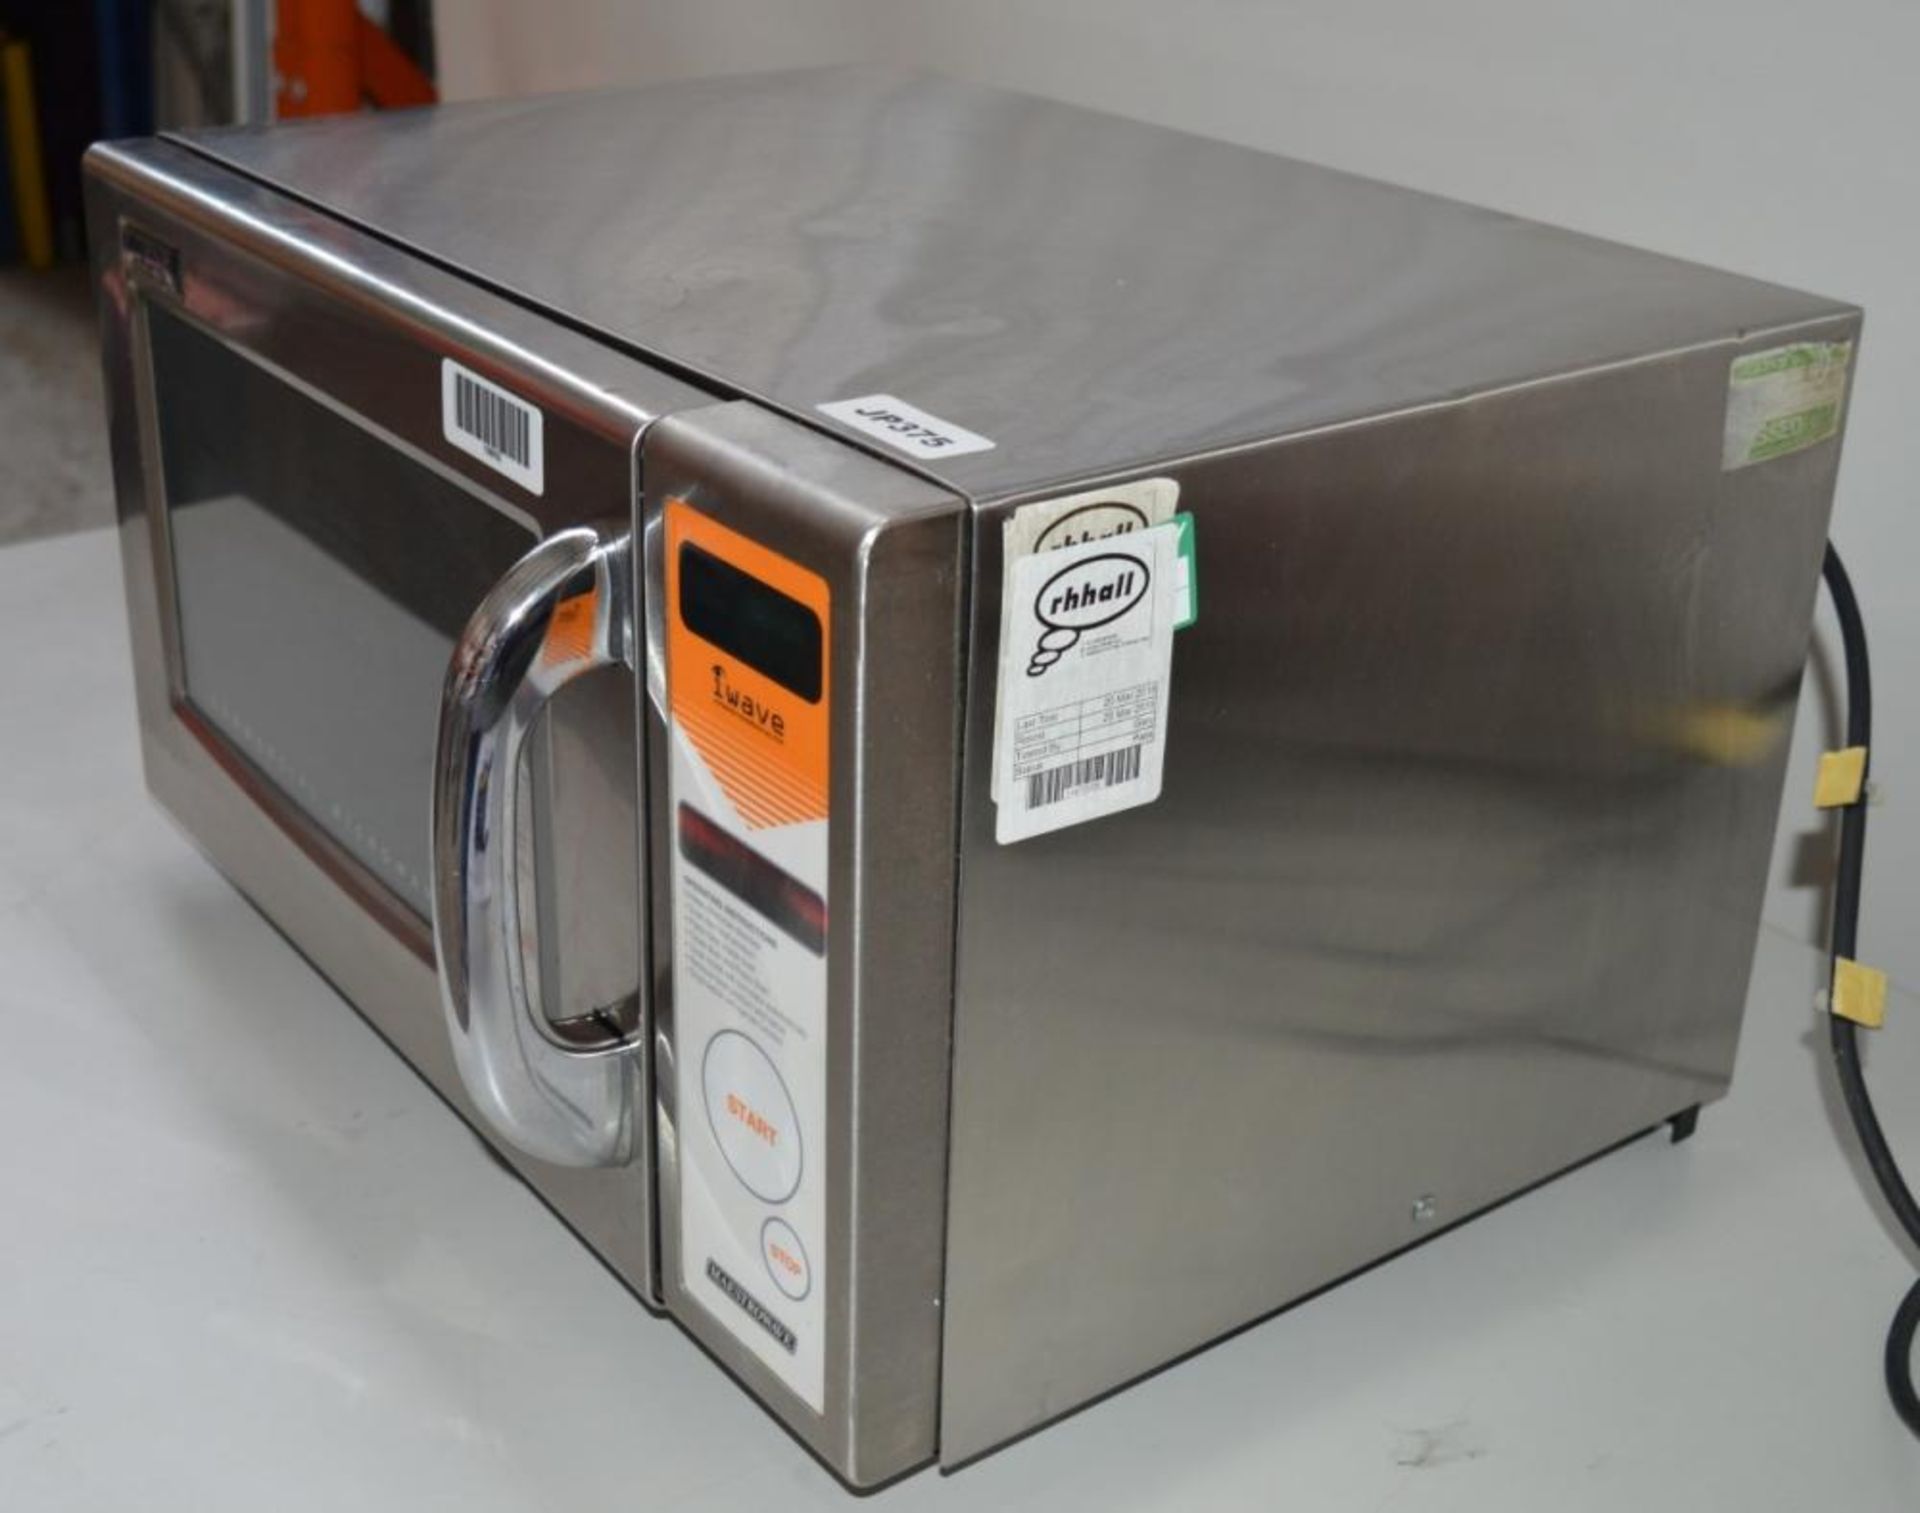 1 x iWave MiWAVE1000 Automated Foodservice Solution - Stainless Steel 1000w Catering Microwave - Image 7 of 14